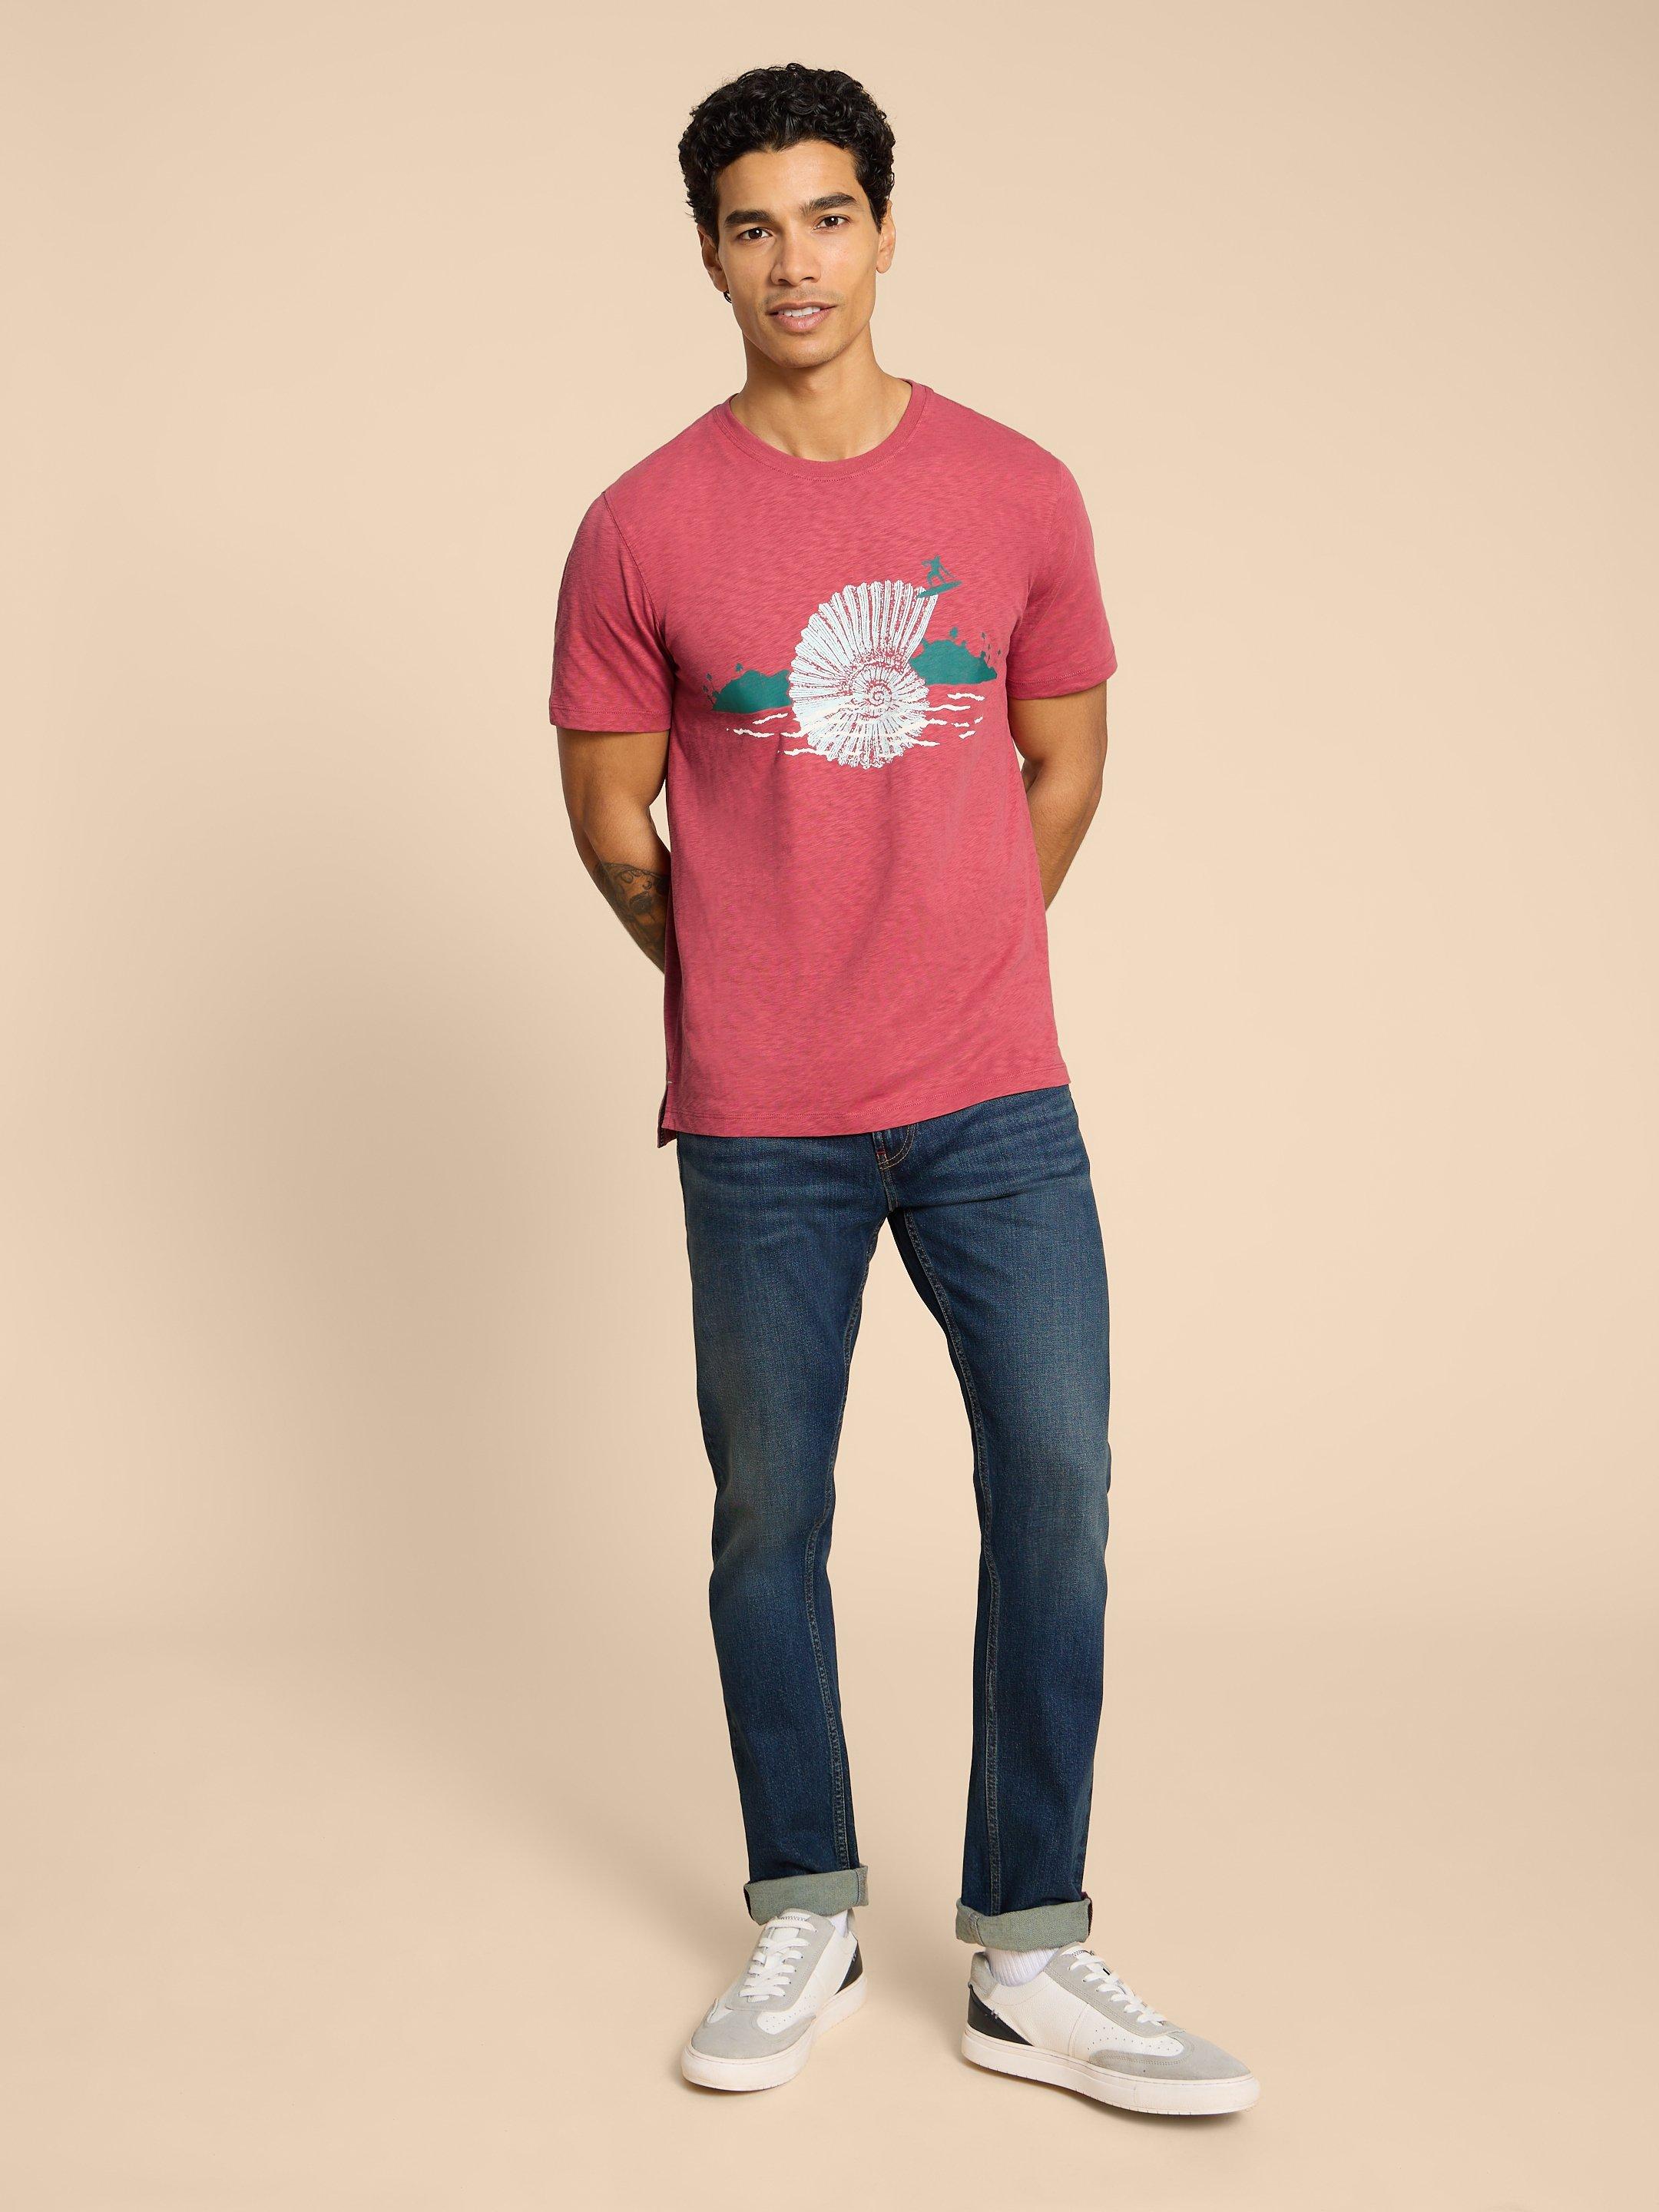 Surf Shell Graphic Tee in CORAL PR - MODEL FRONT